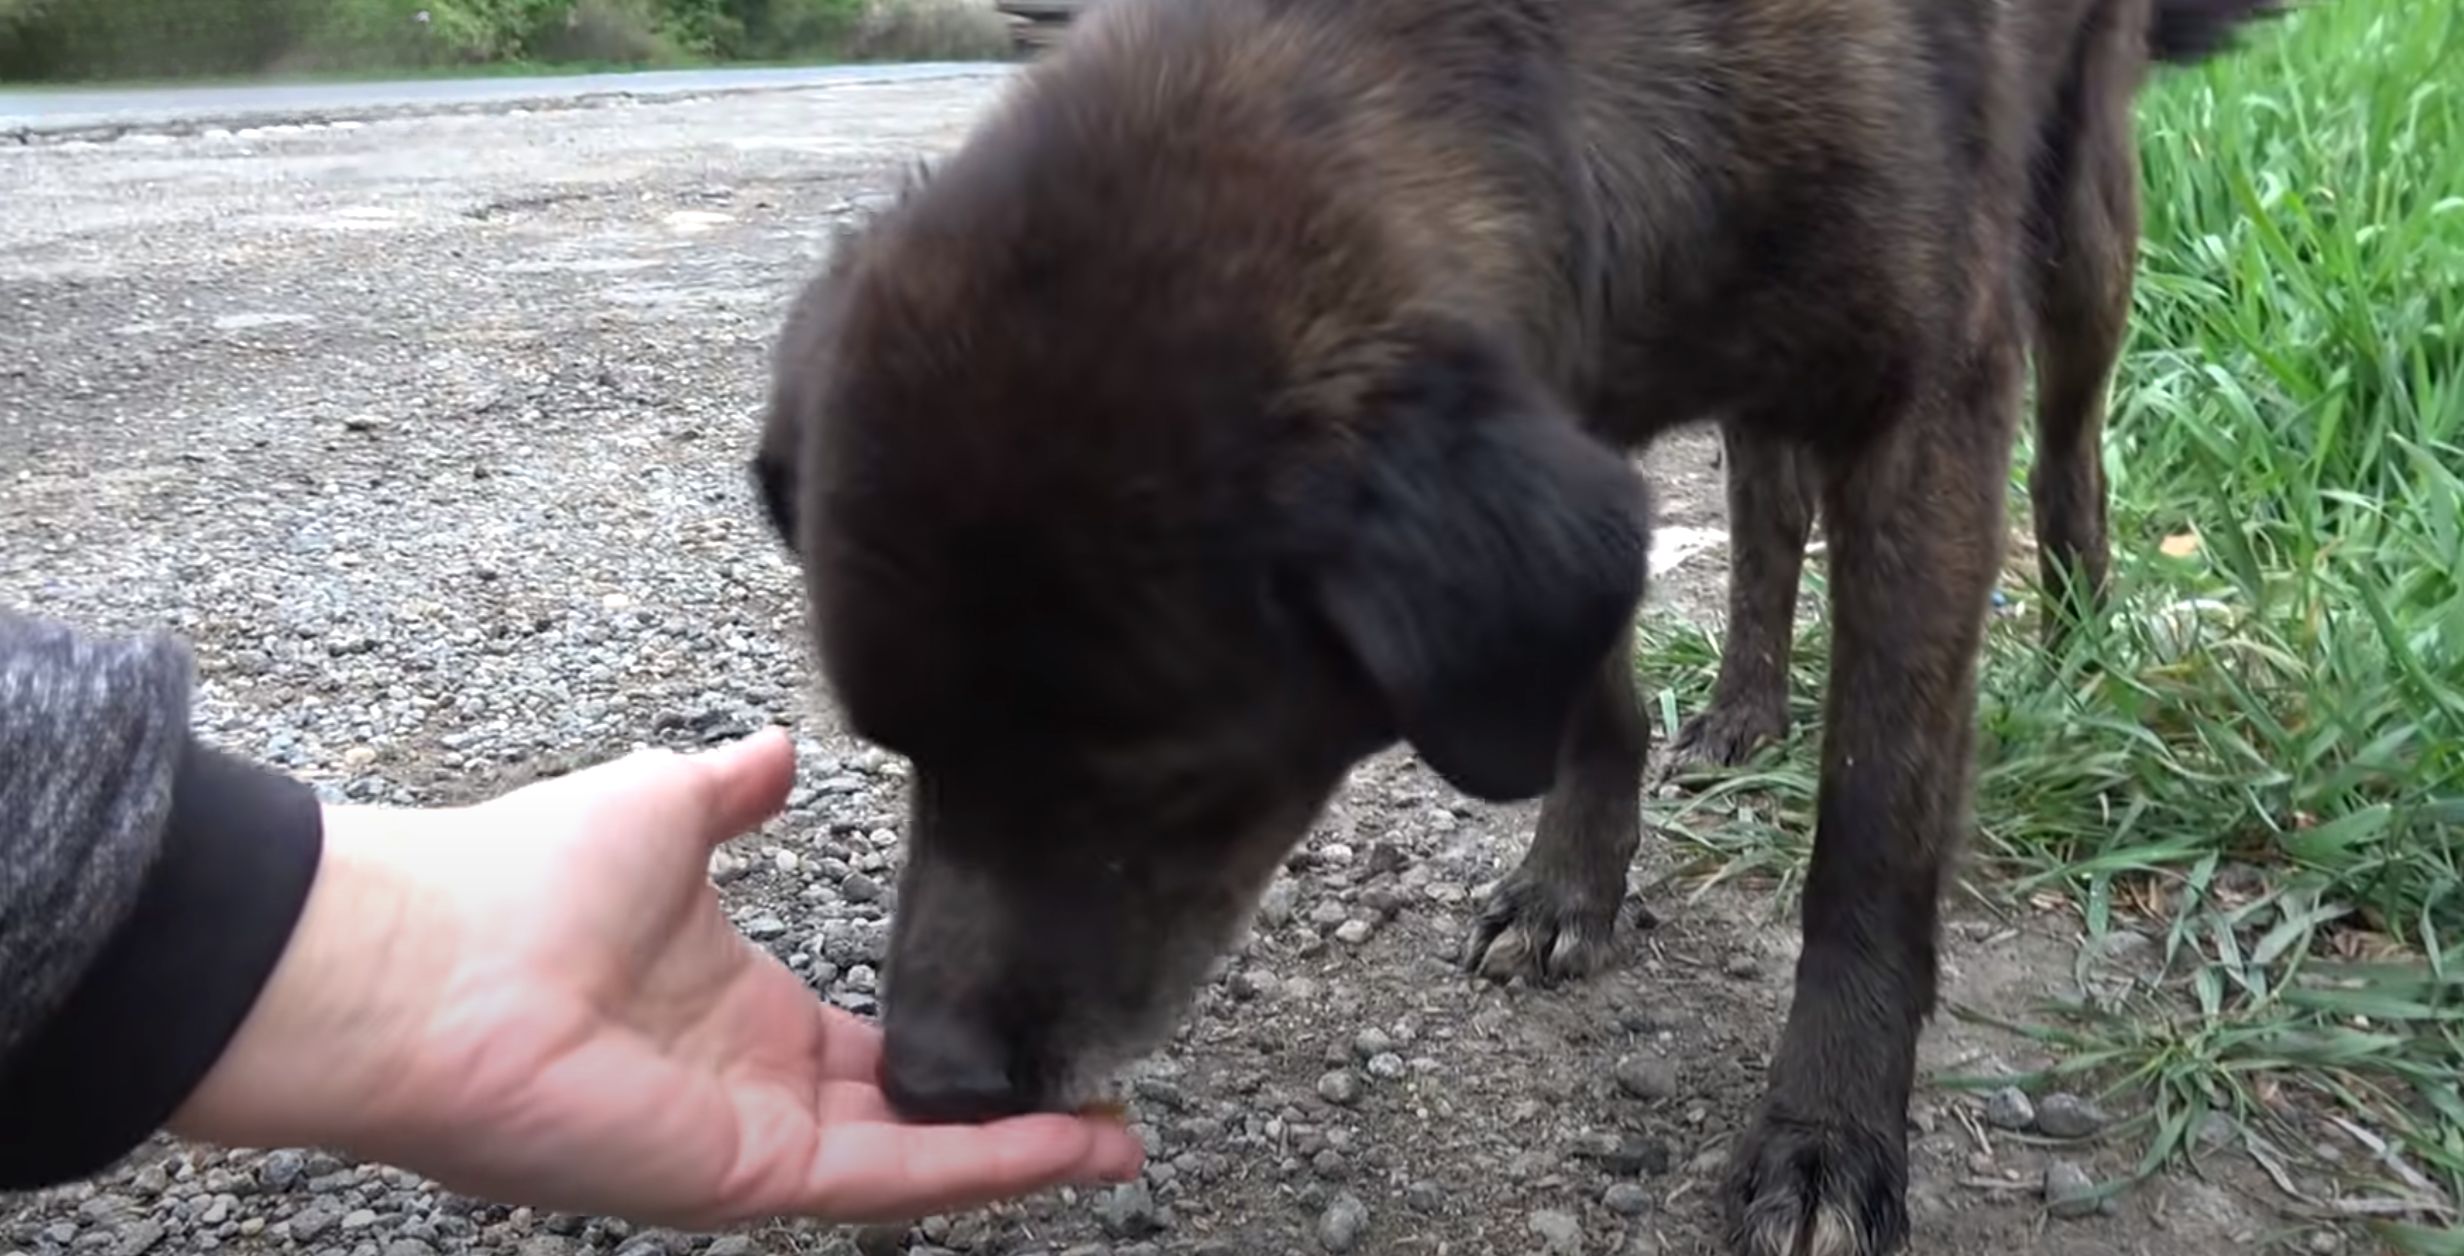 close-up photo of the dog sniffing a hand